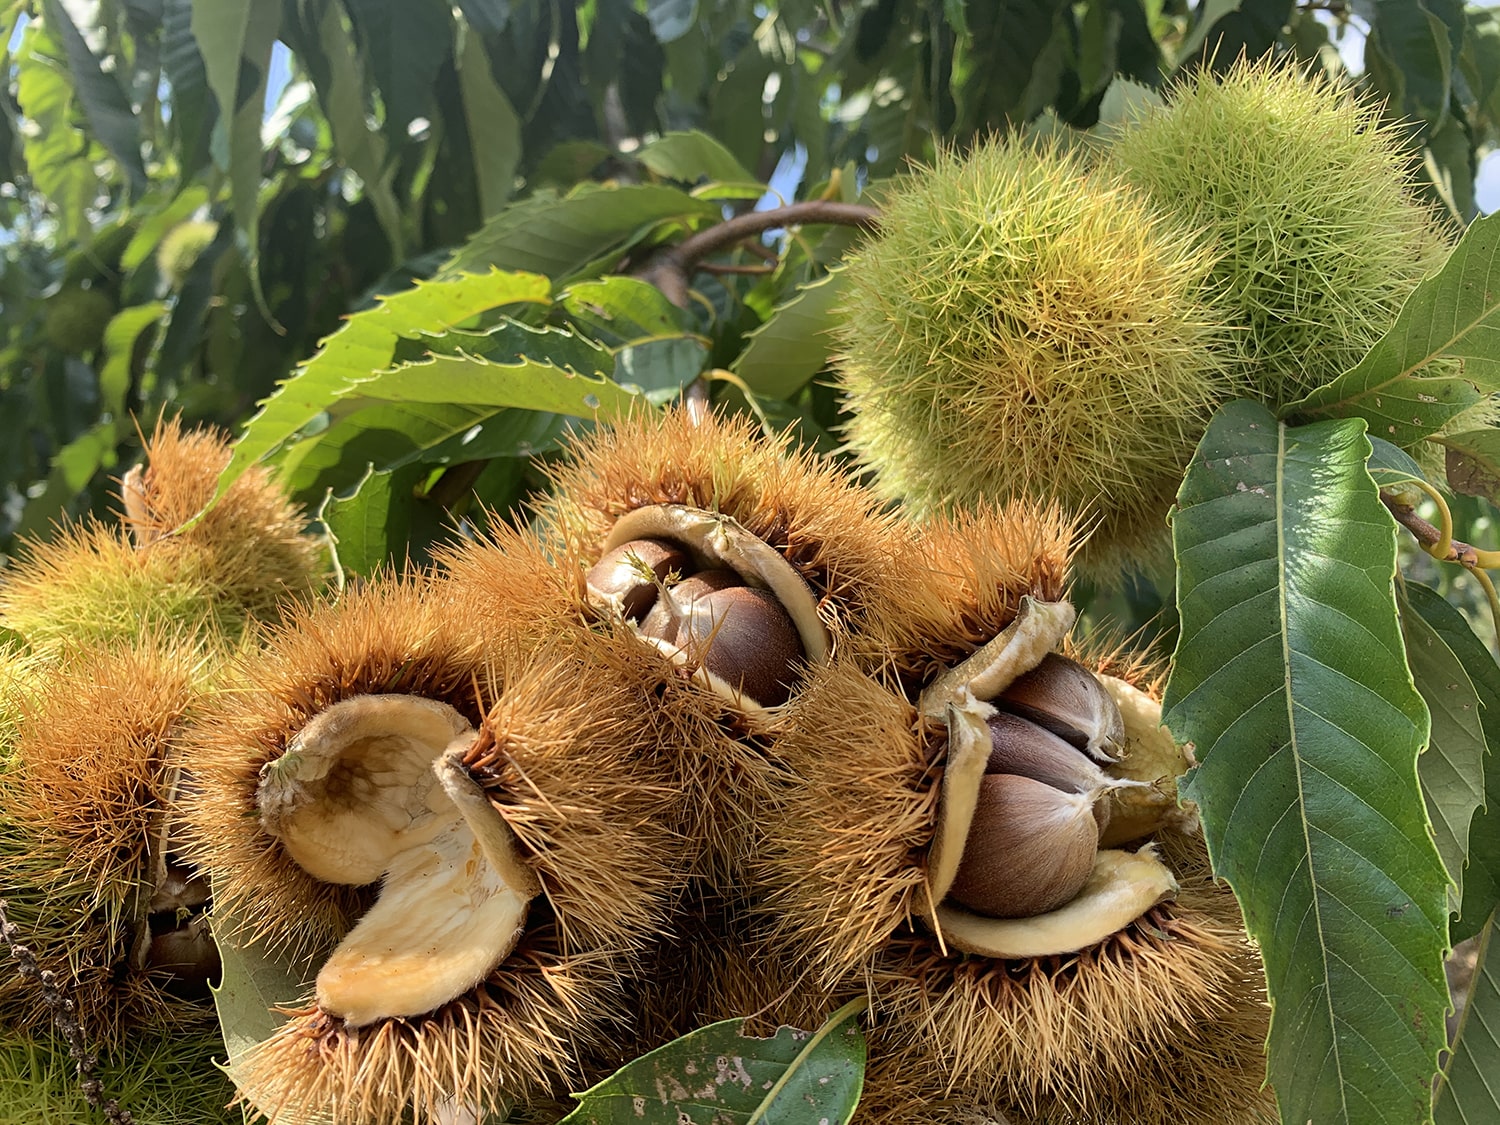 three bulbous spiky open brown pods revealing nuts inside attached to a leafy tree branch. two other closed versions of those pods are off on the side